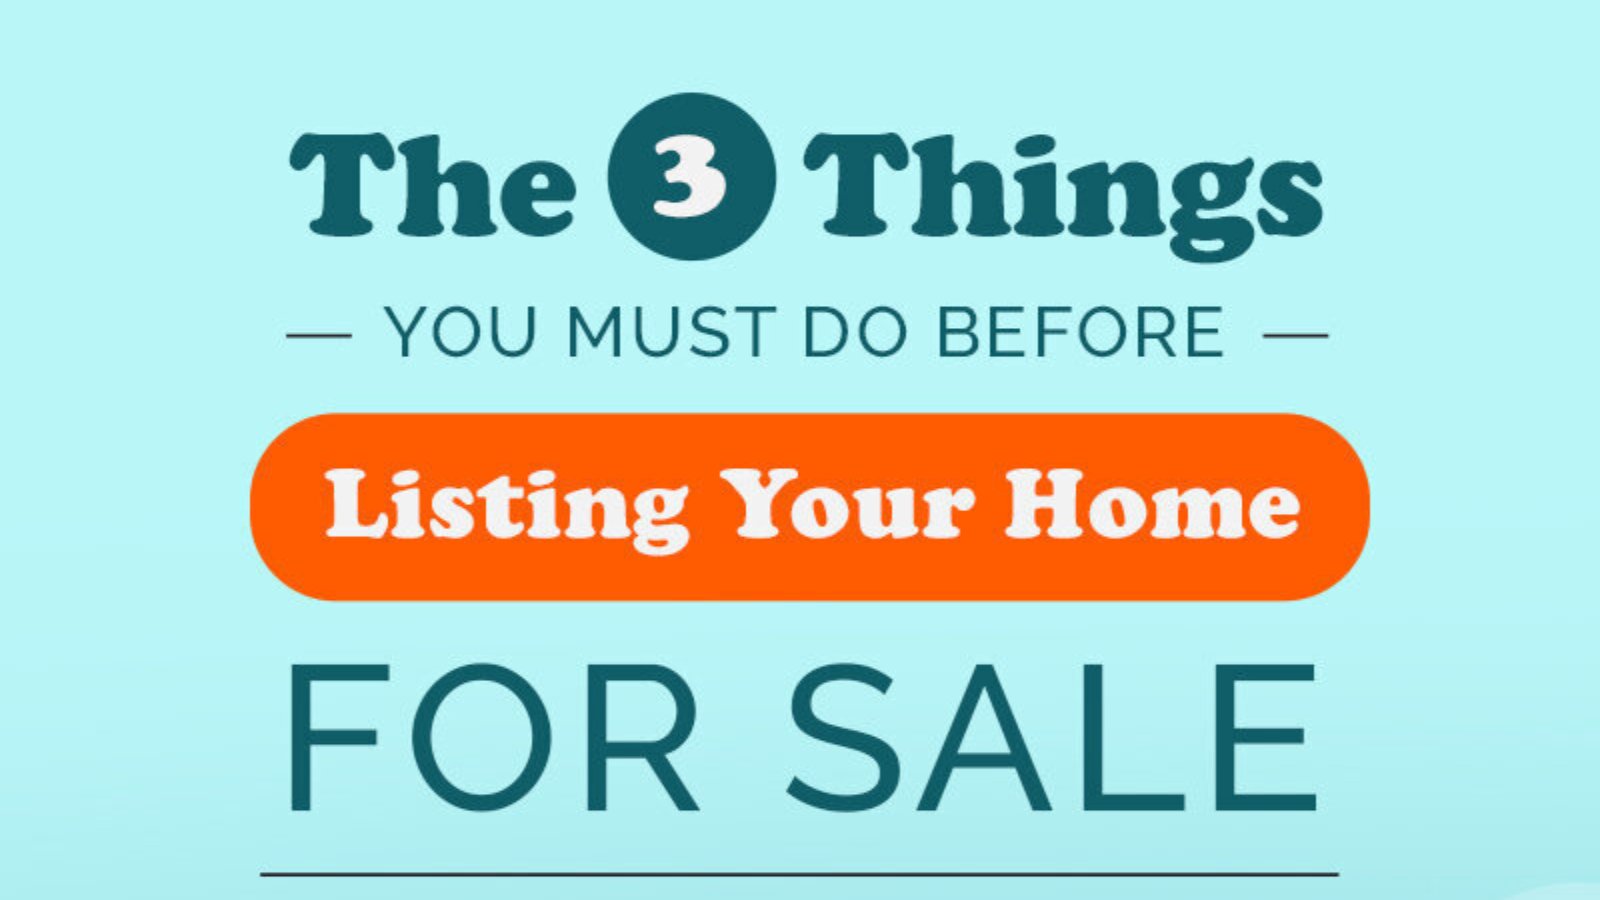 The 3 Things You Must Do Before Listing Your Home For Sale